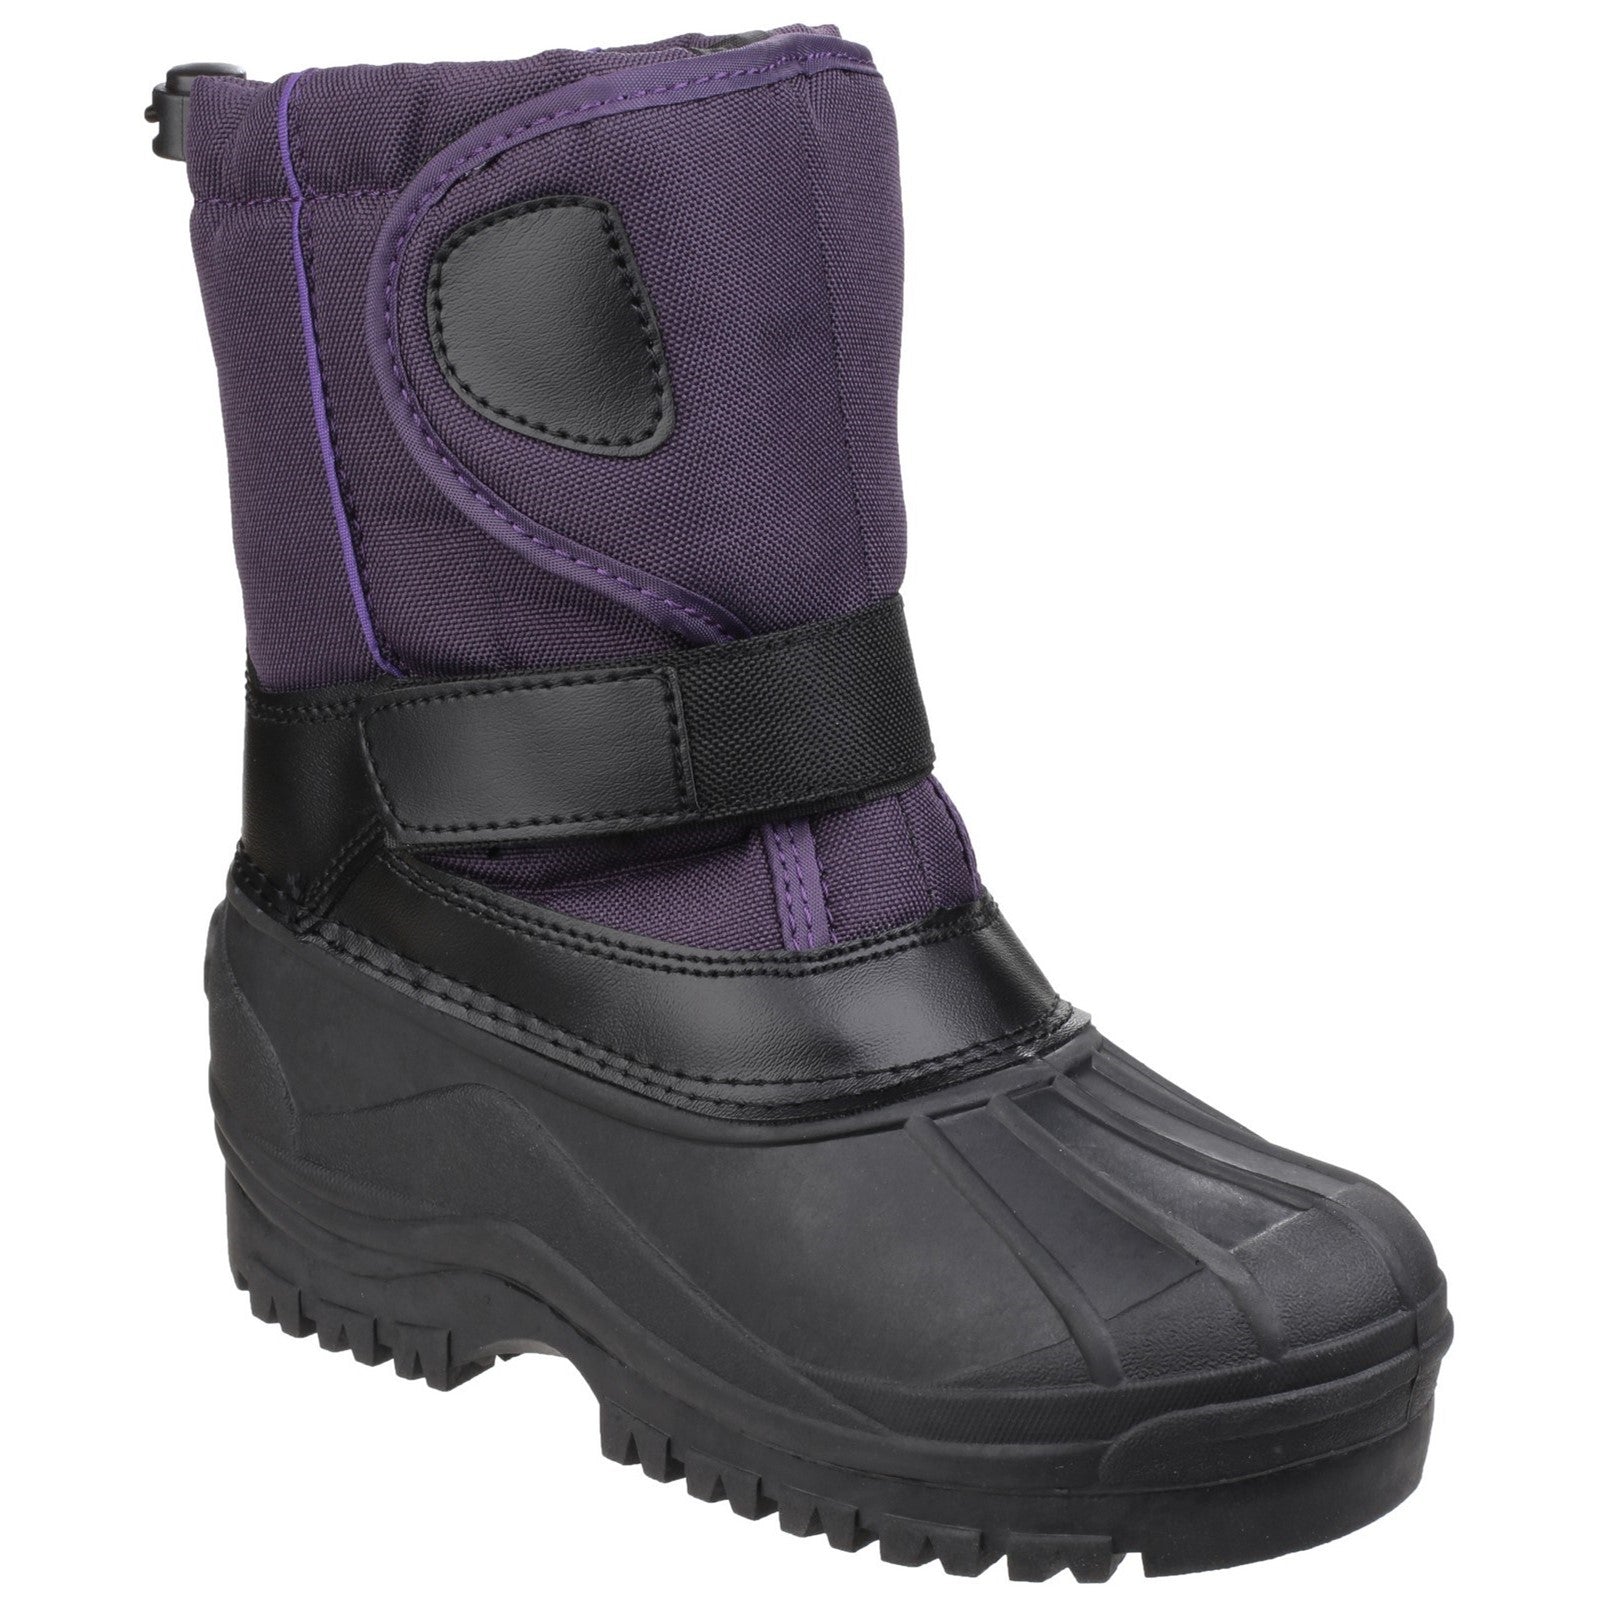 Avalanche Snow Boot, Cotswold